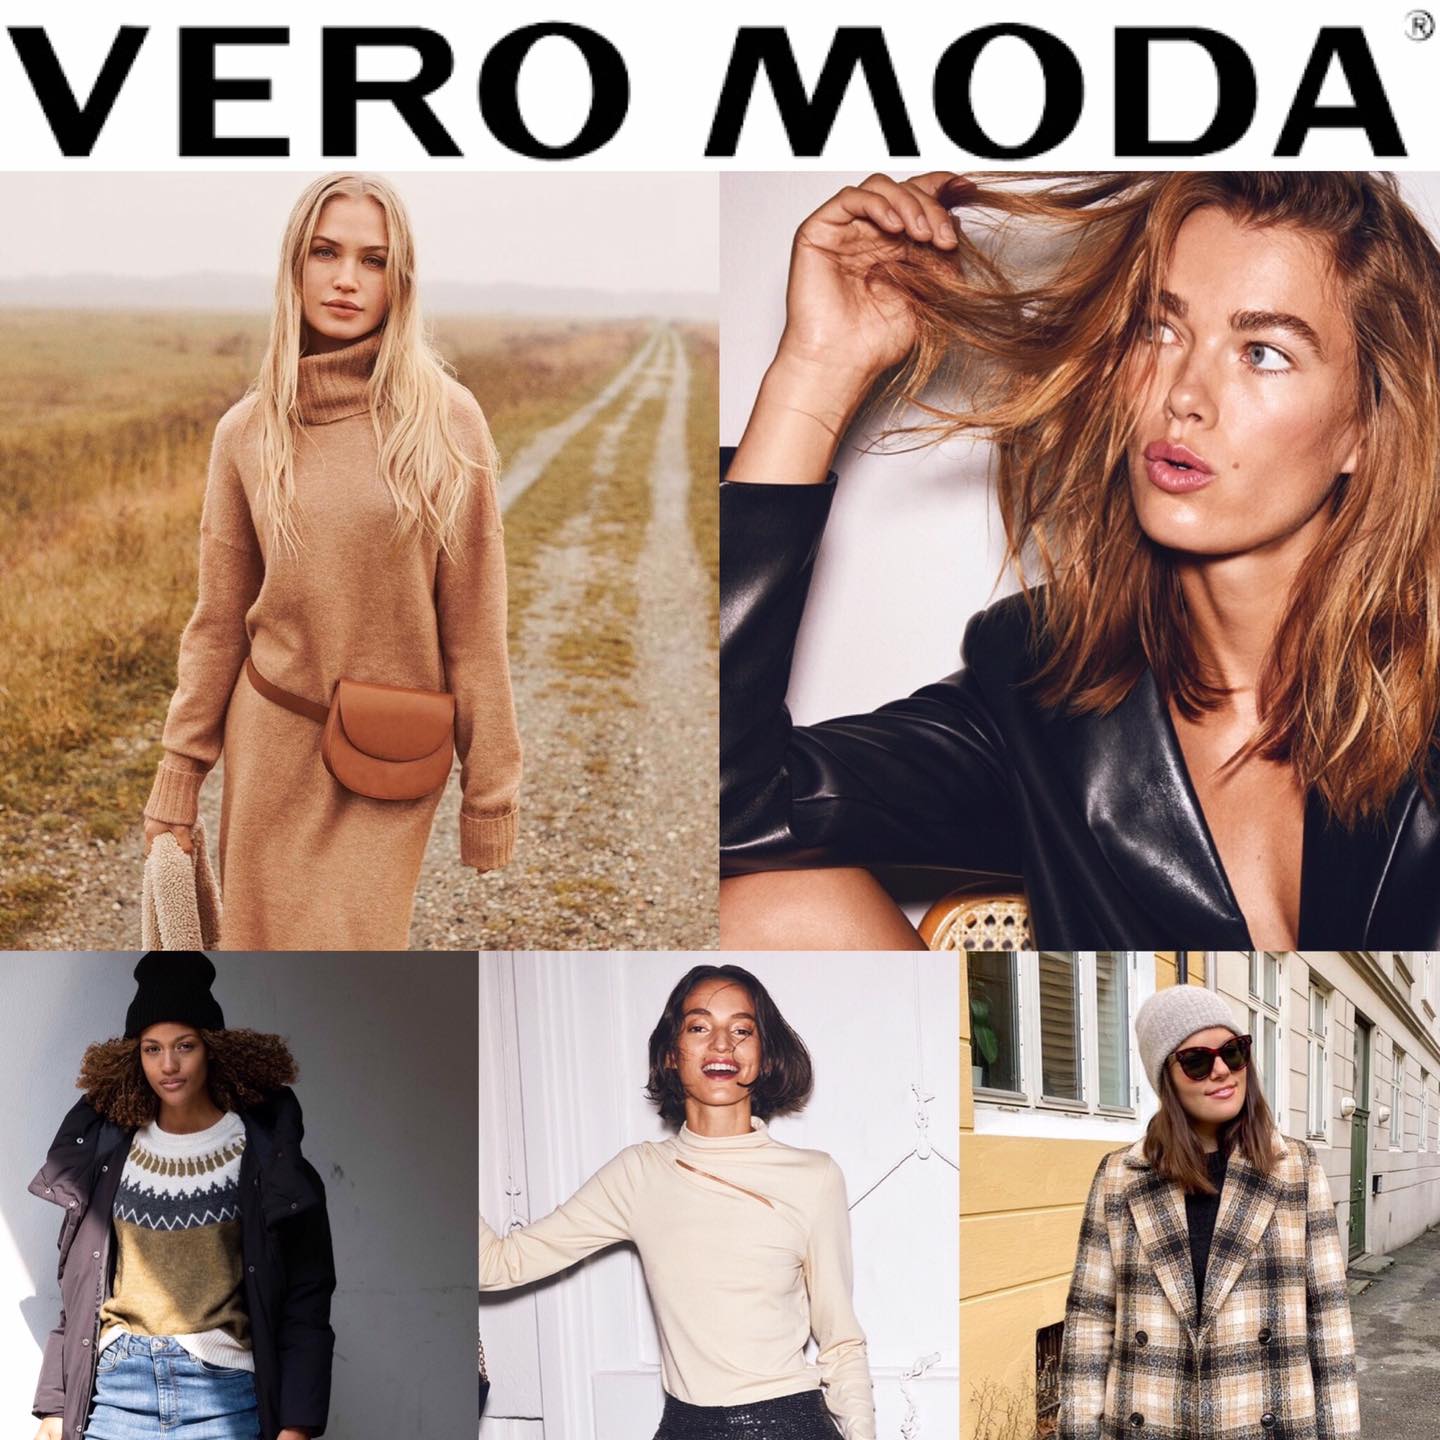 Vero Moda is coming to City Square VERY SOON! - City Square